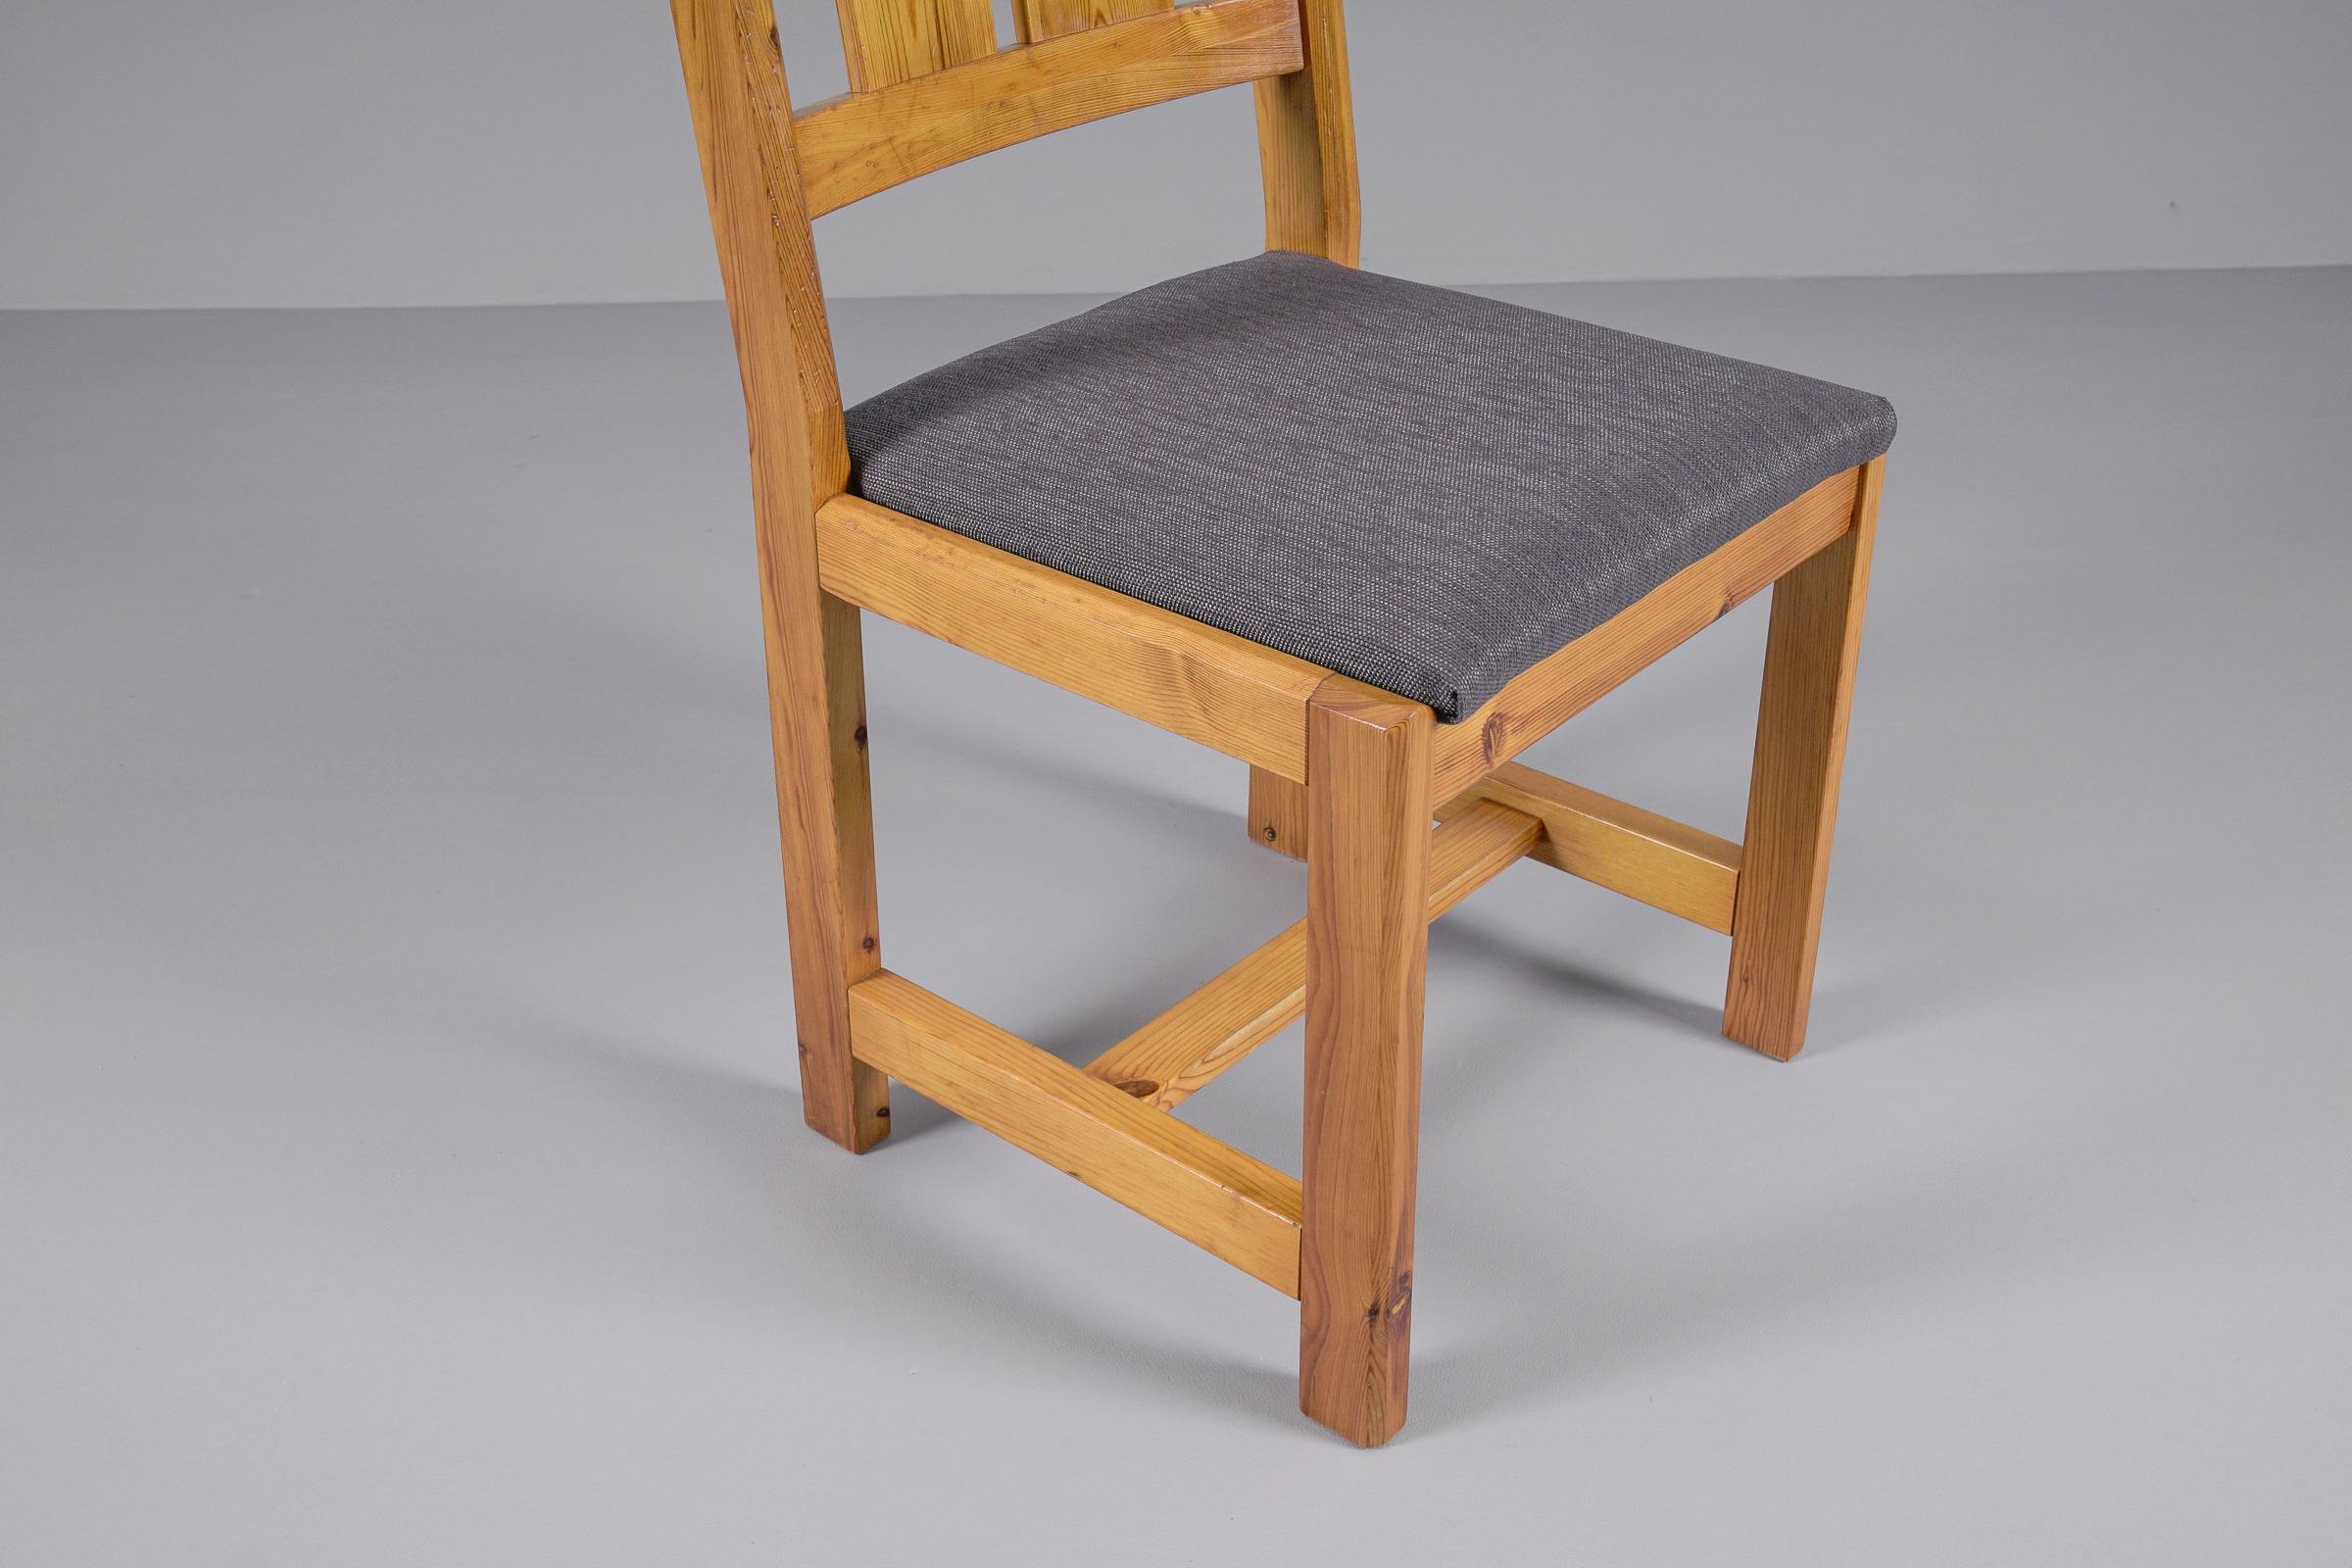  Set of 4 Swedish Pine Chairs by Gilbert Marklund for Furusnickarn AB, 1970s For Sale 12